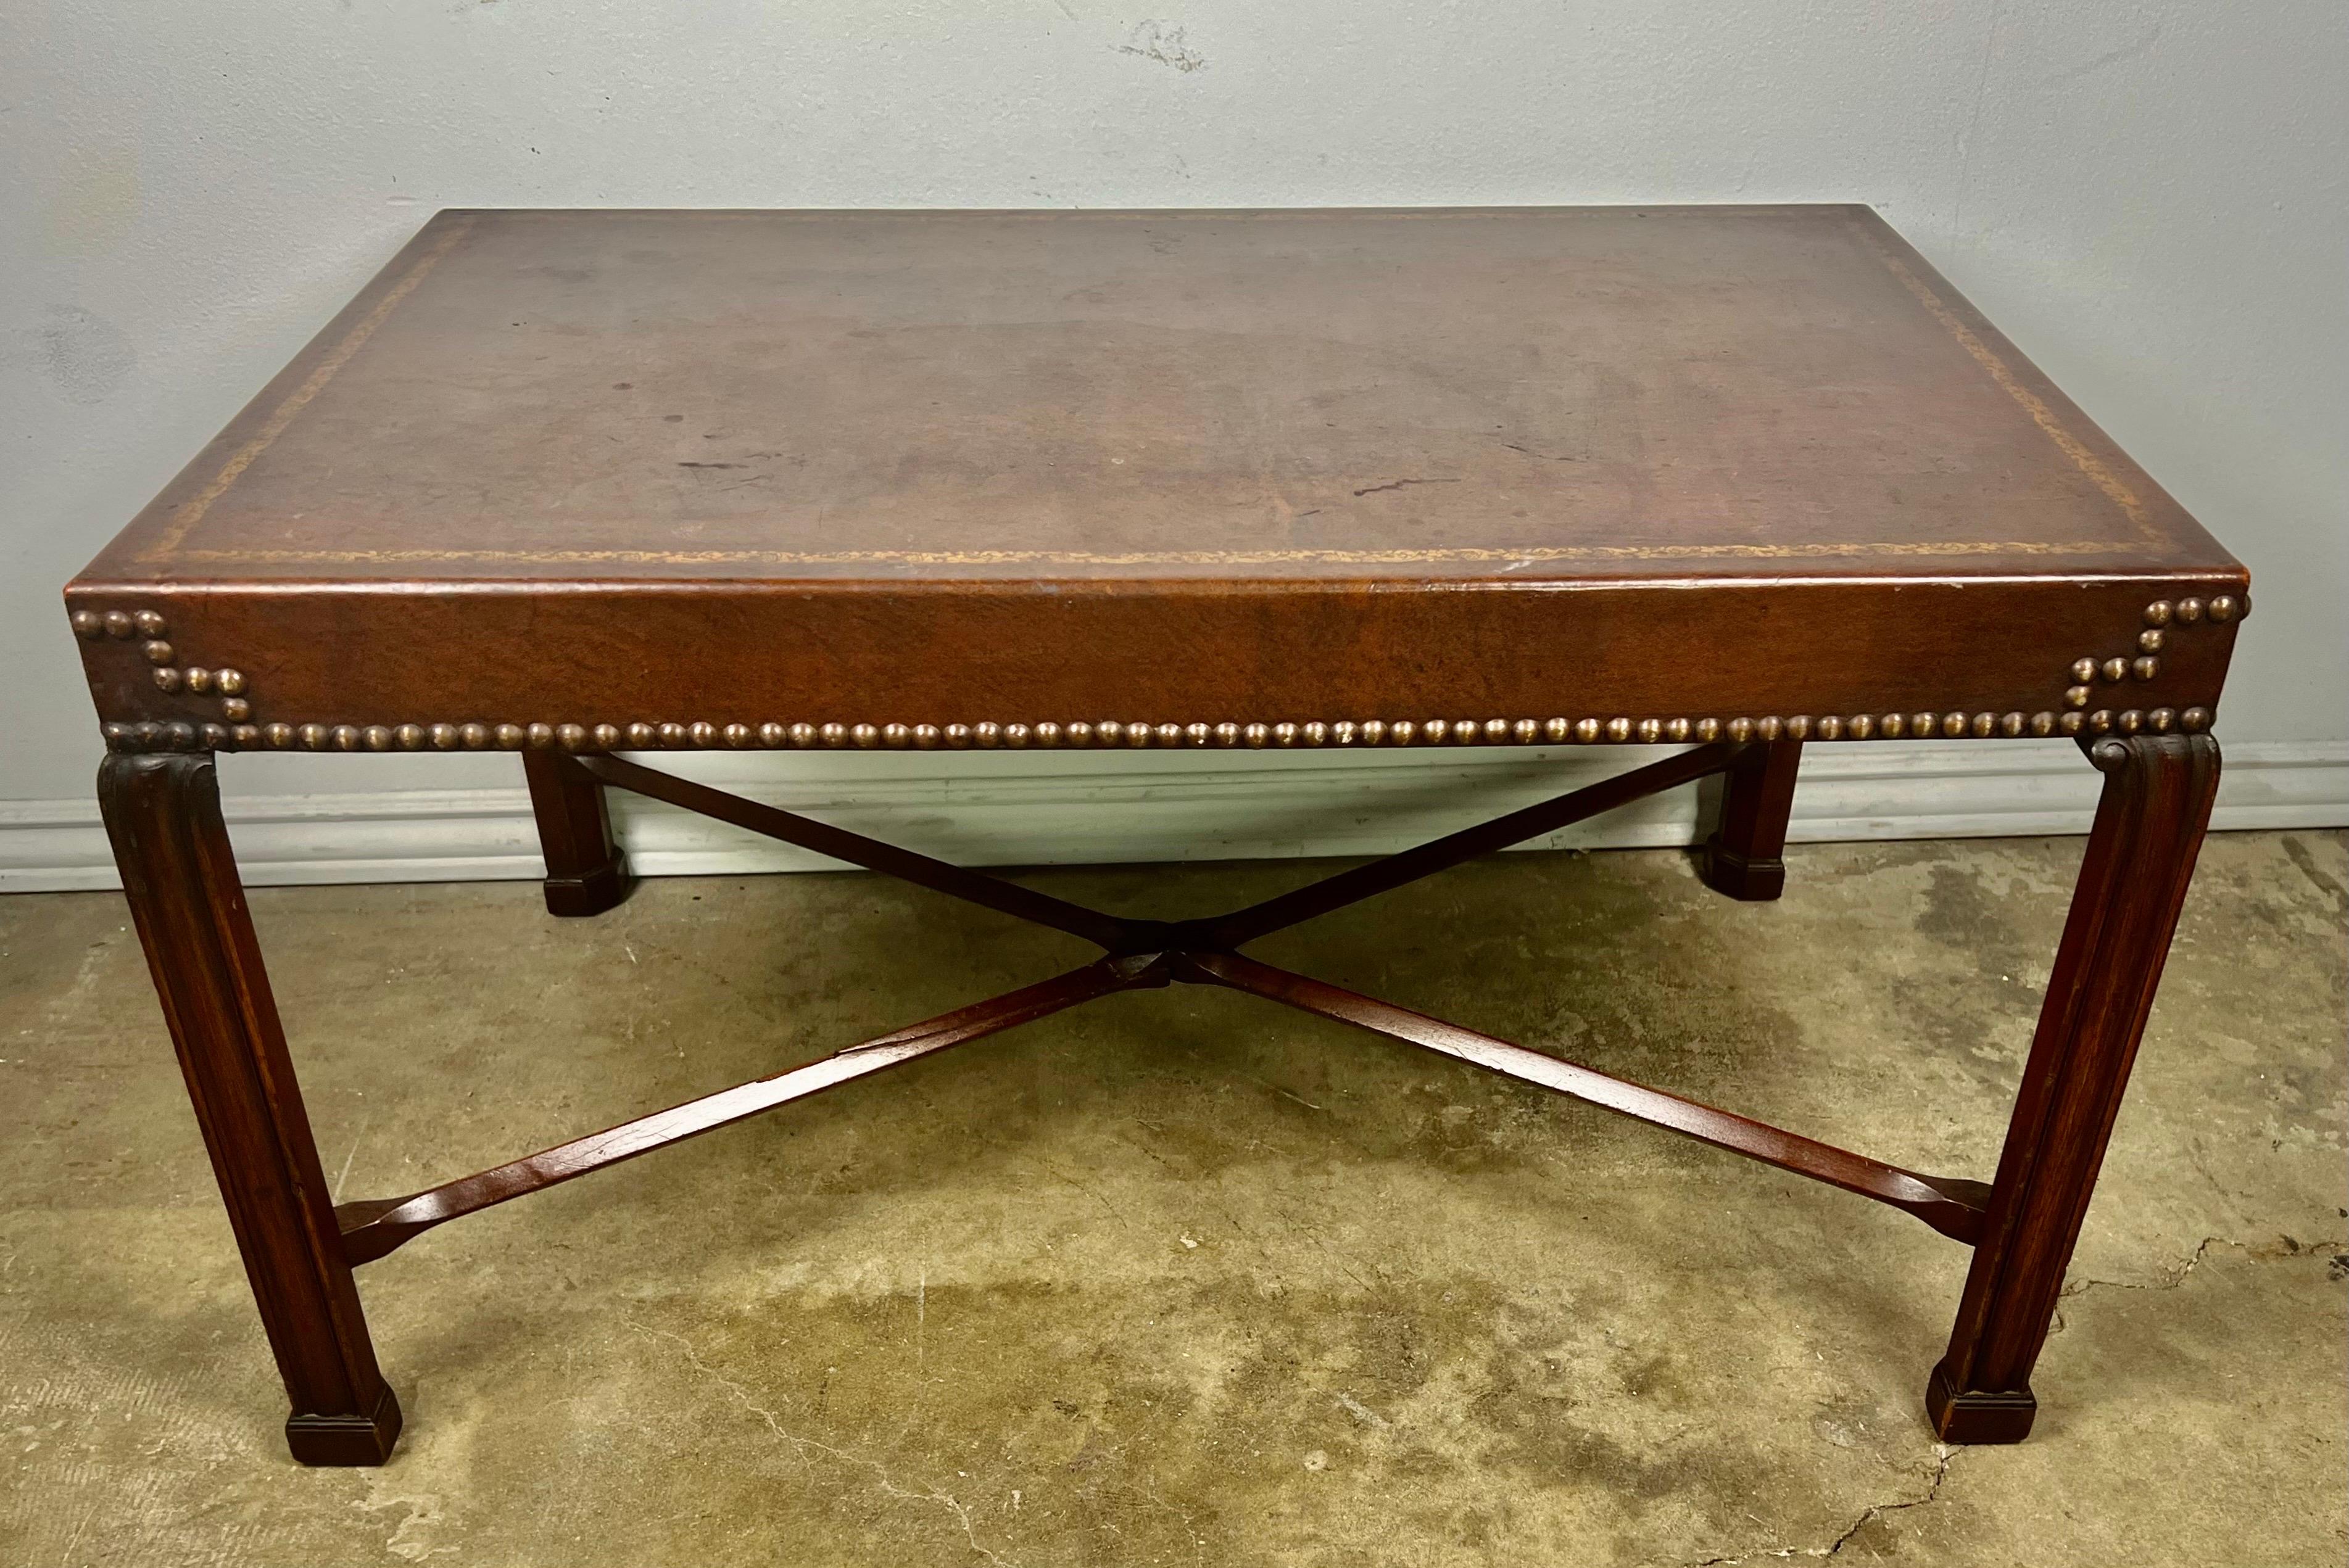 English Chippendale style mahogany tea table with a leather embossed top. The table stands on four straight legs connected by an 